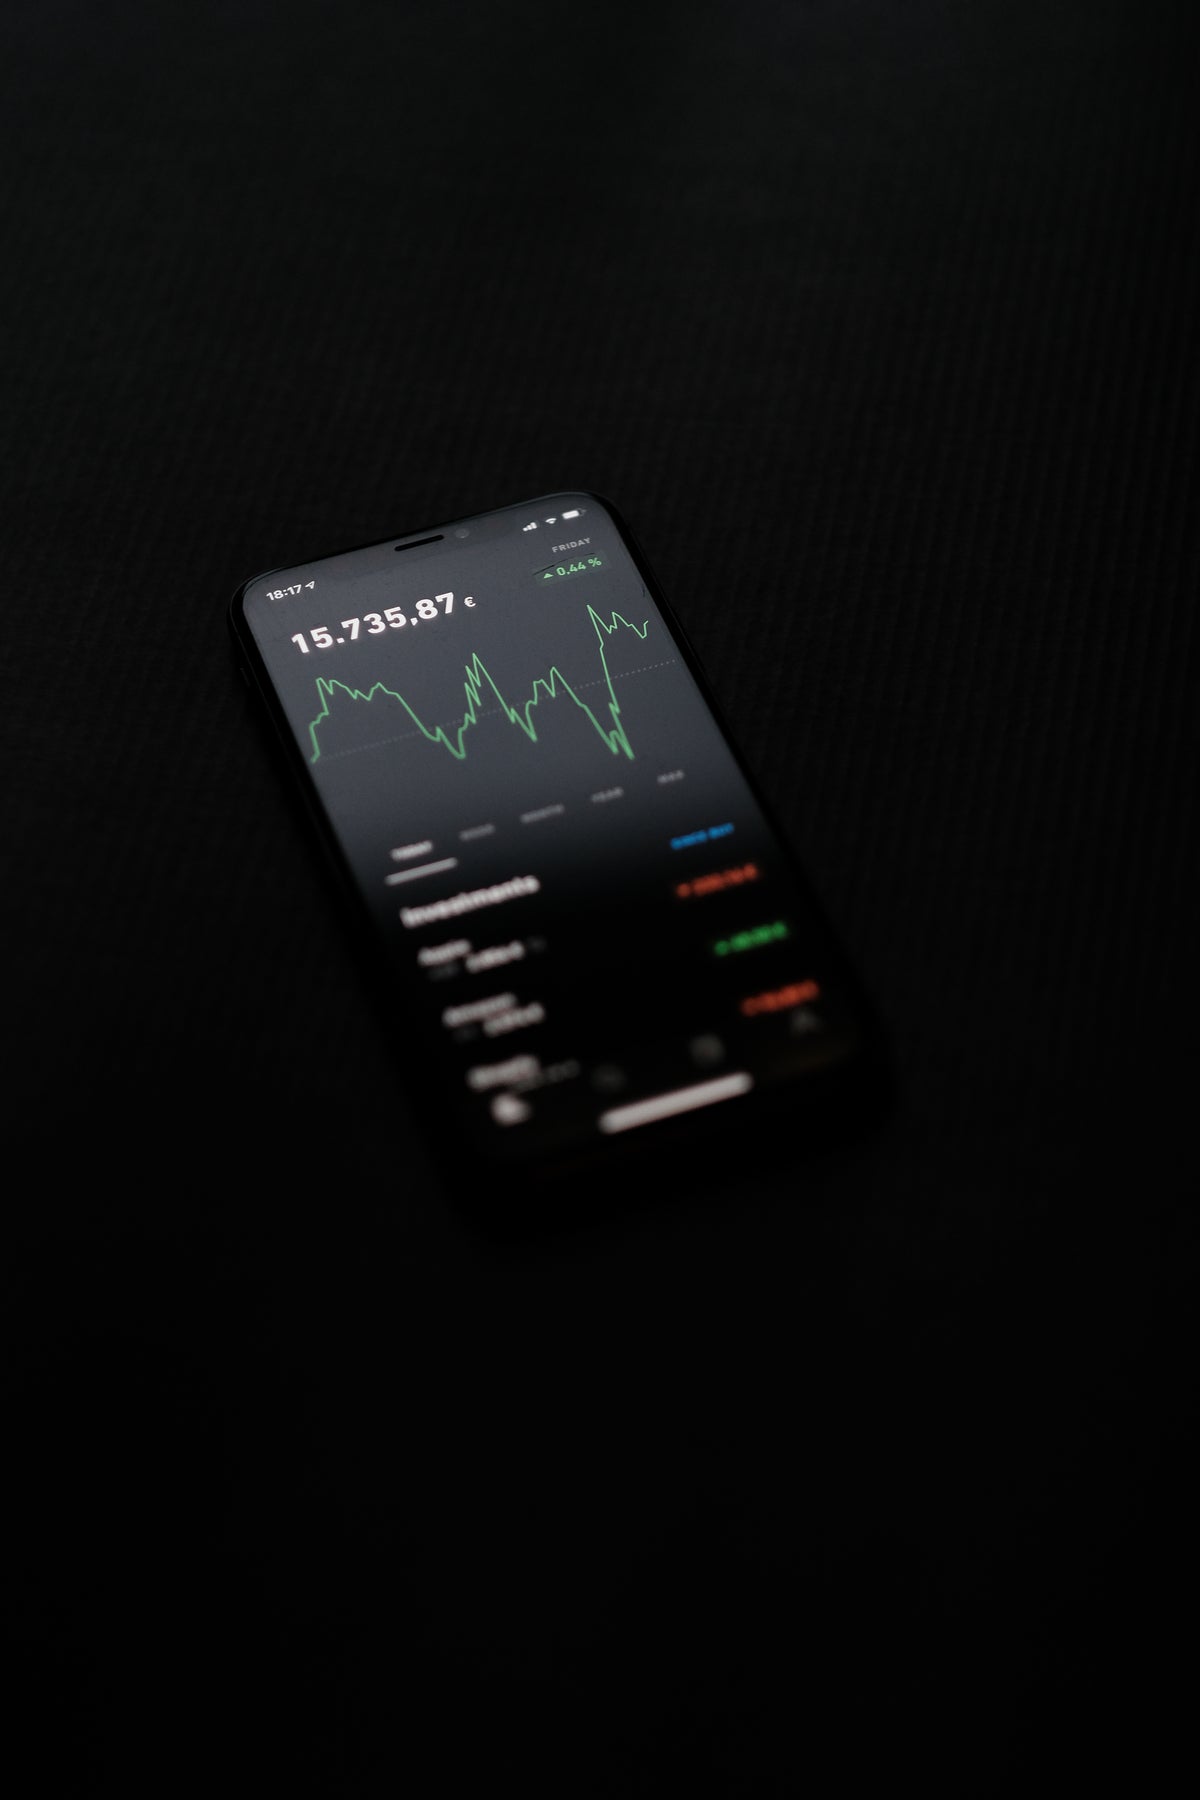 black background photo of cellphone with graphs